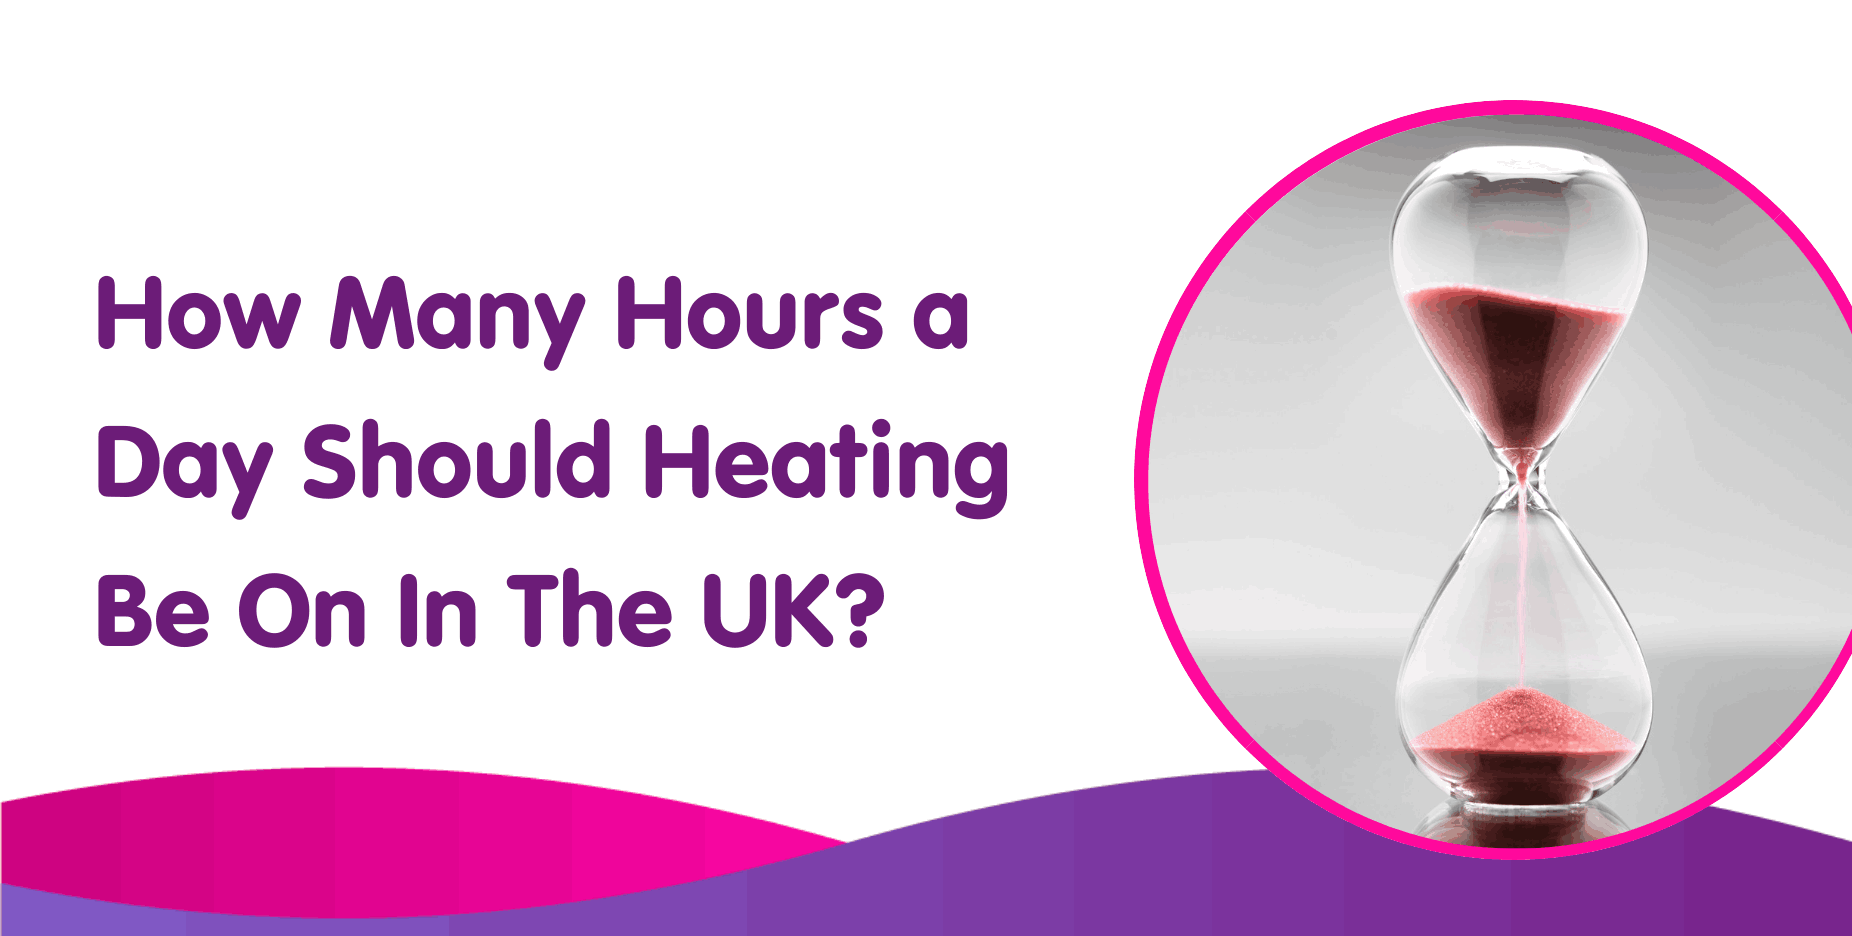 How Many Hours a Day Should Heating Be On In The UK?